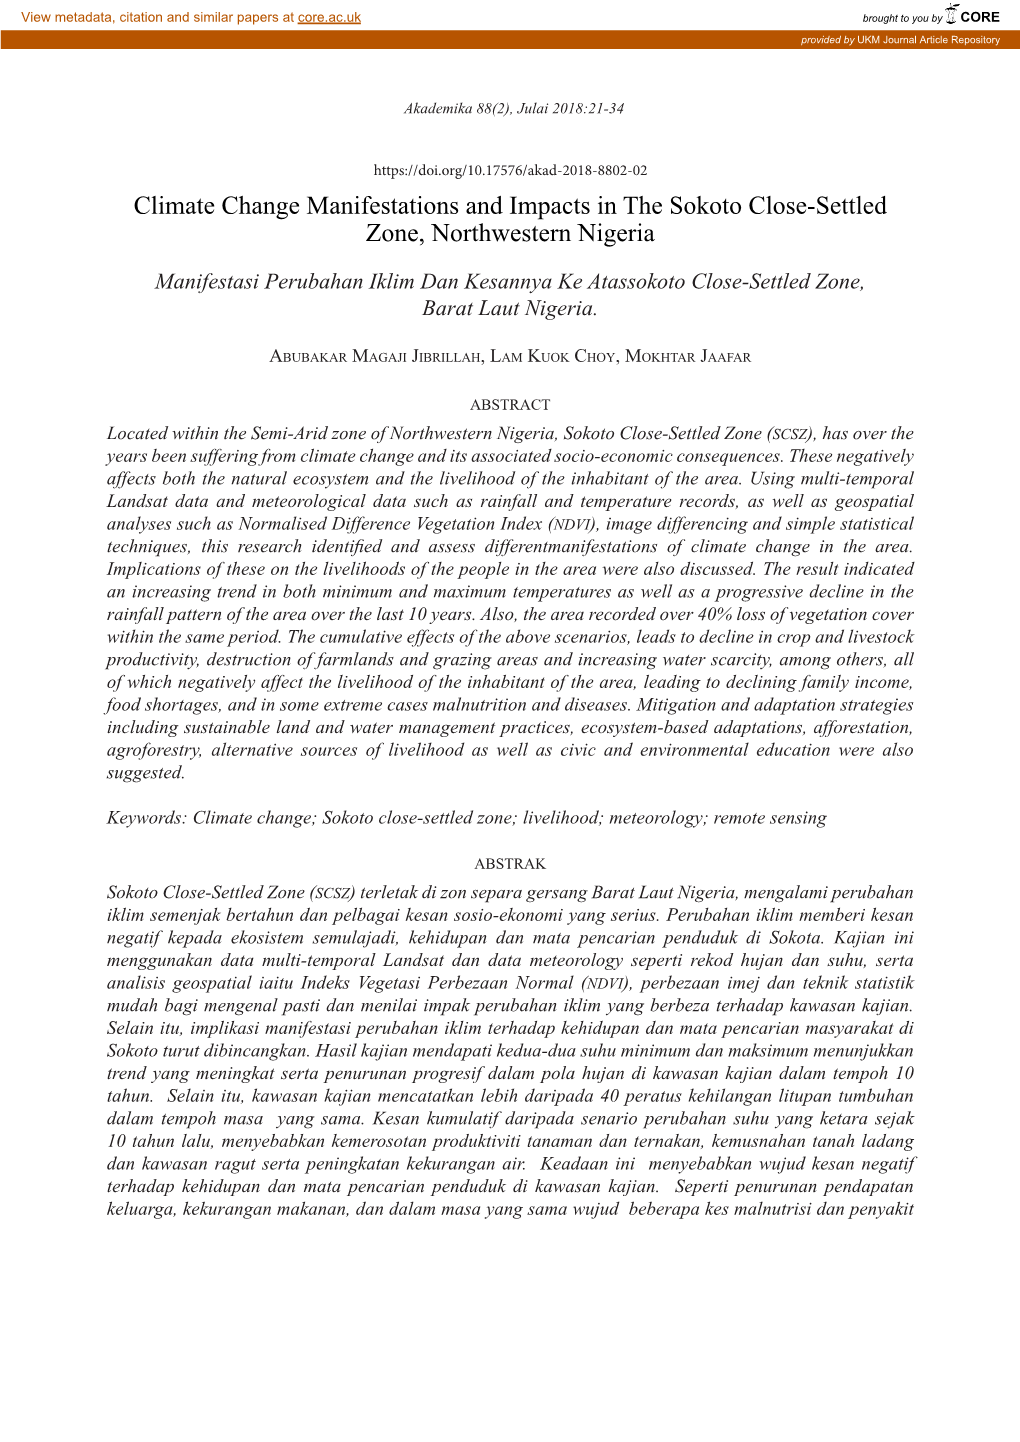 Climate Change Manifestations and Impacts in the Sokoto Close-Settled Zone, Northwestern Nigeria